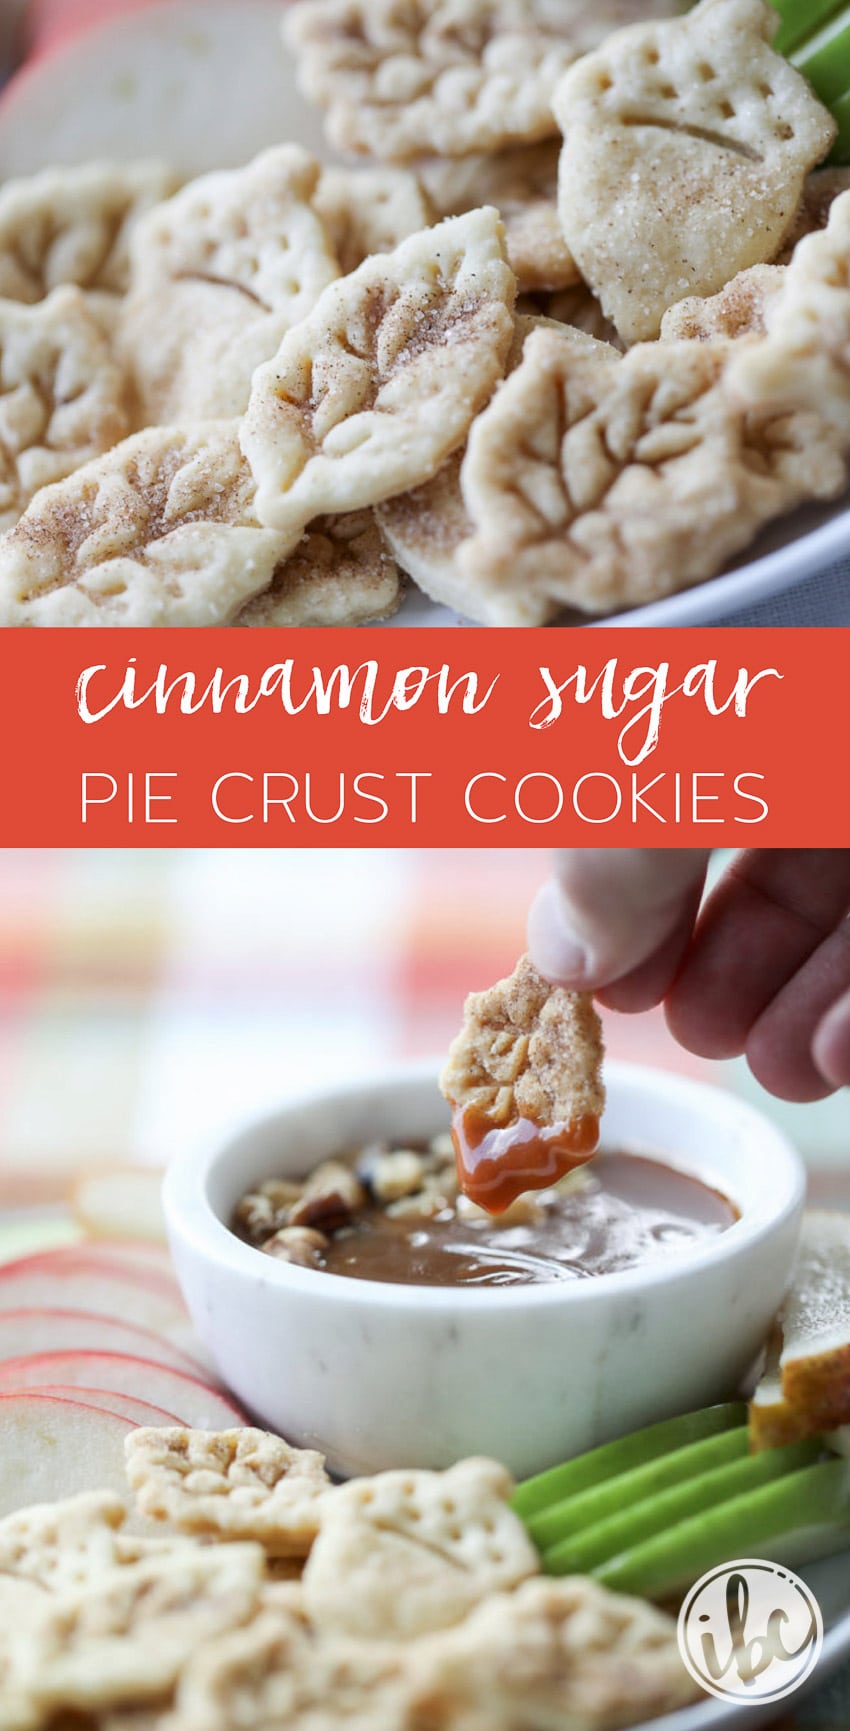 These Cinnamon Sugar Pie Crust Cookies make great use of leftover pie dough for a sweet snack. #pie #piecrust #cookies #piecrustcookies #cinnamon #dessert #recipe